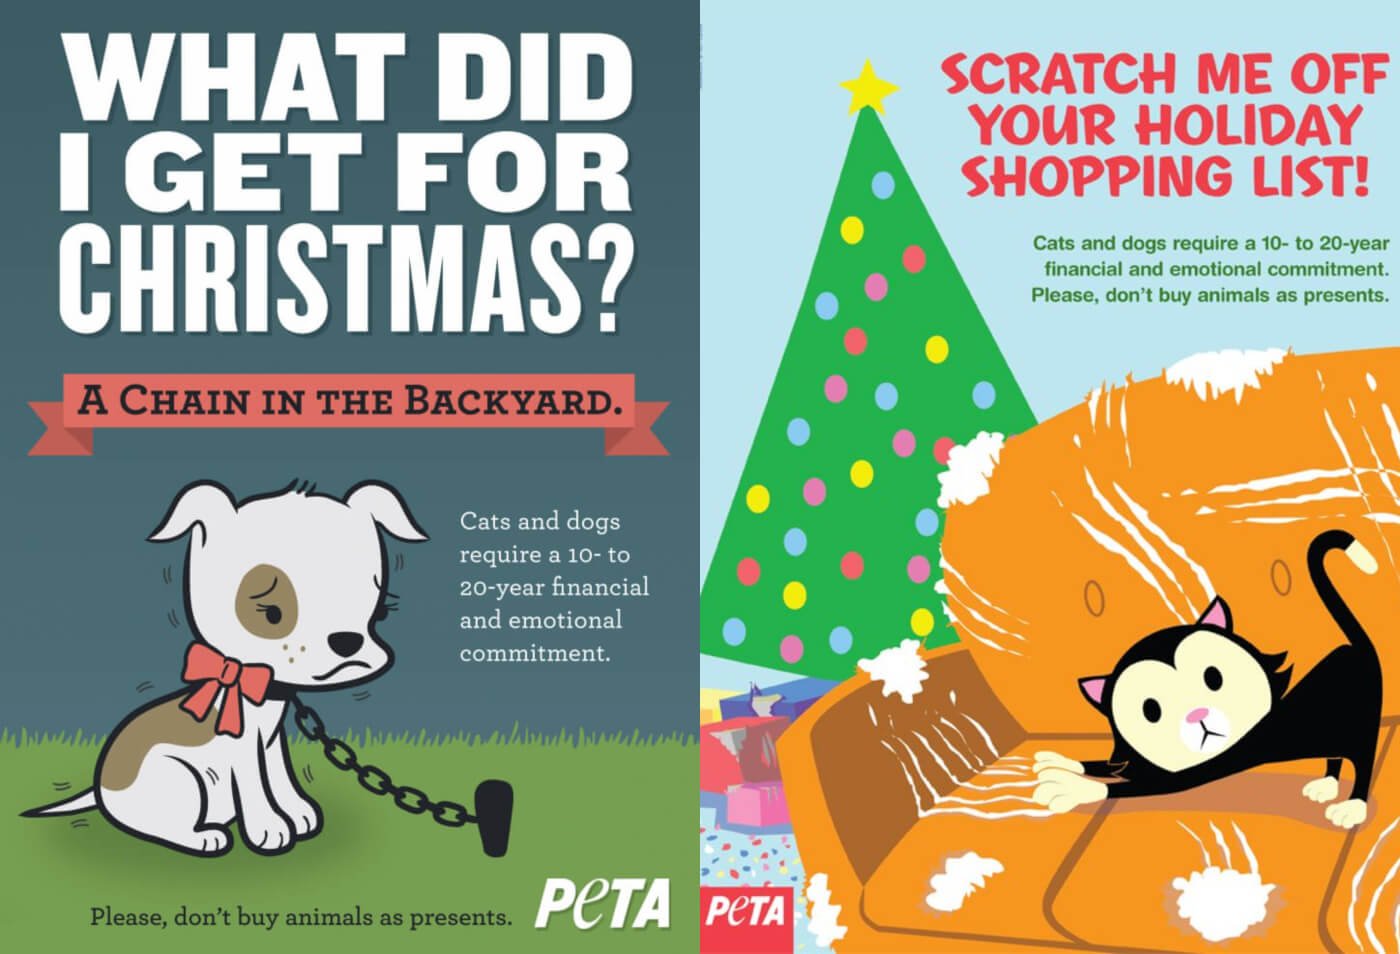 Shopping For A Puppy This Christmas? Here's Why It's A Bad Idea